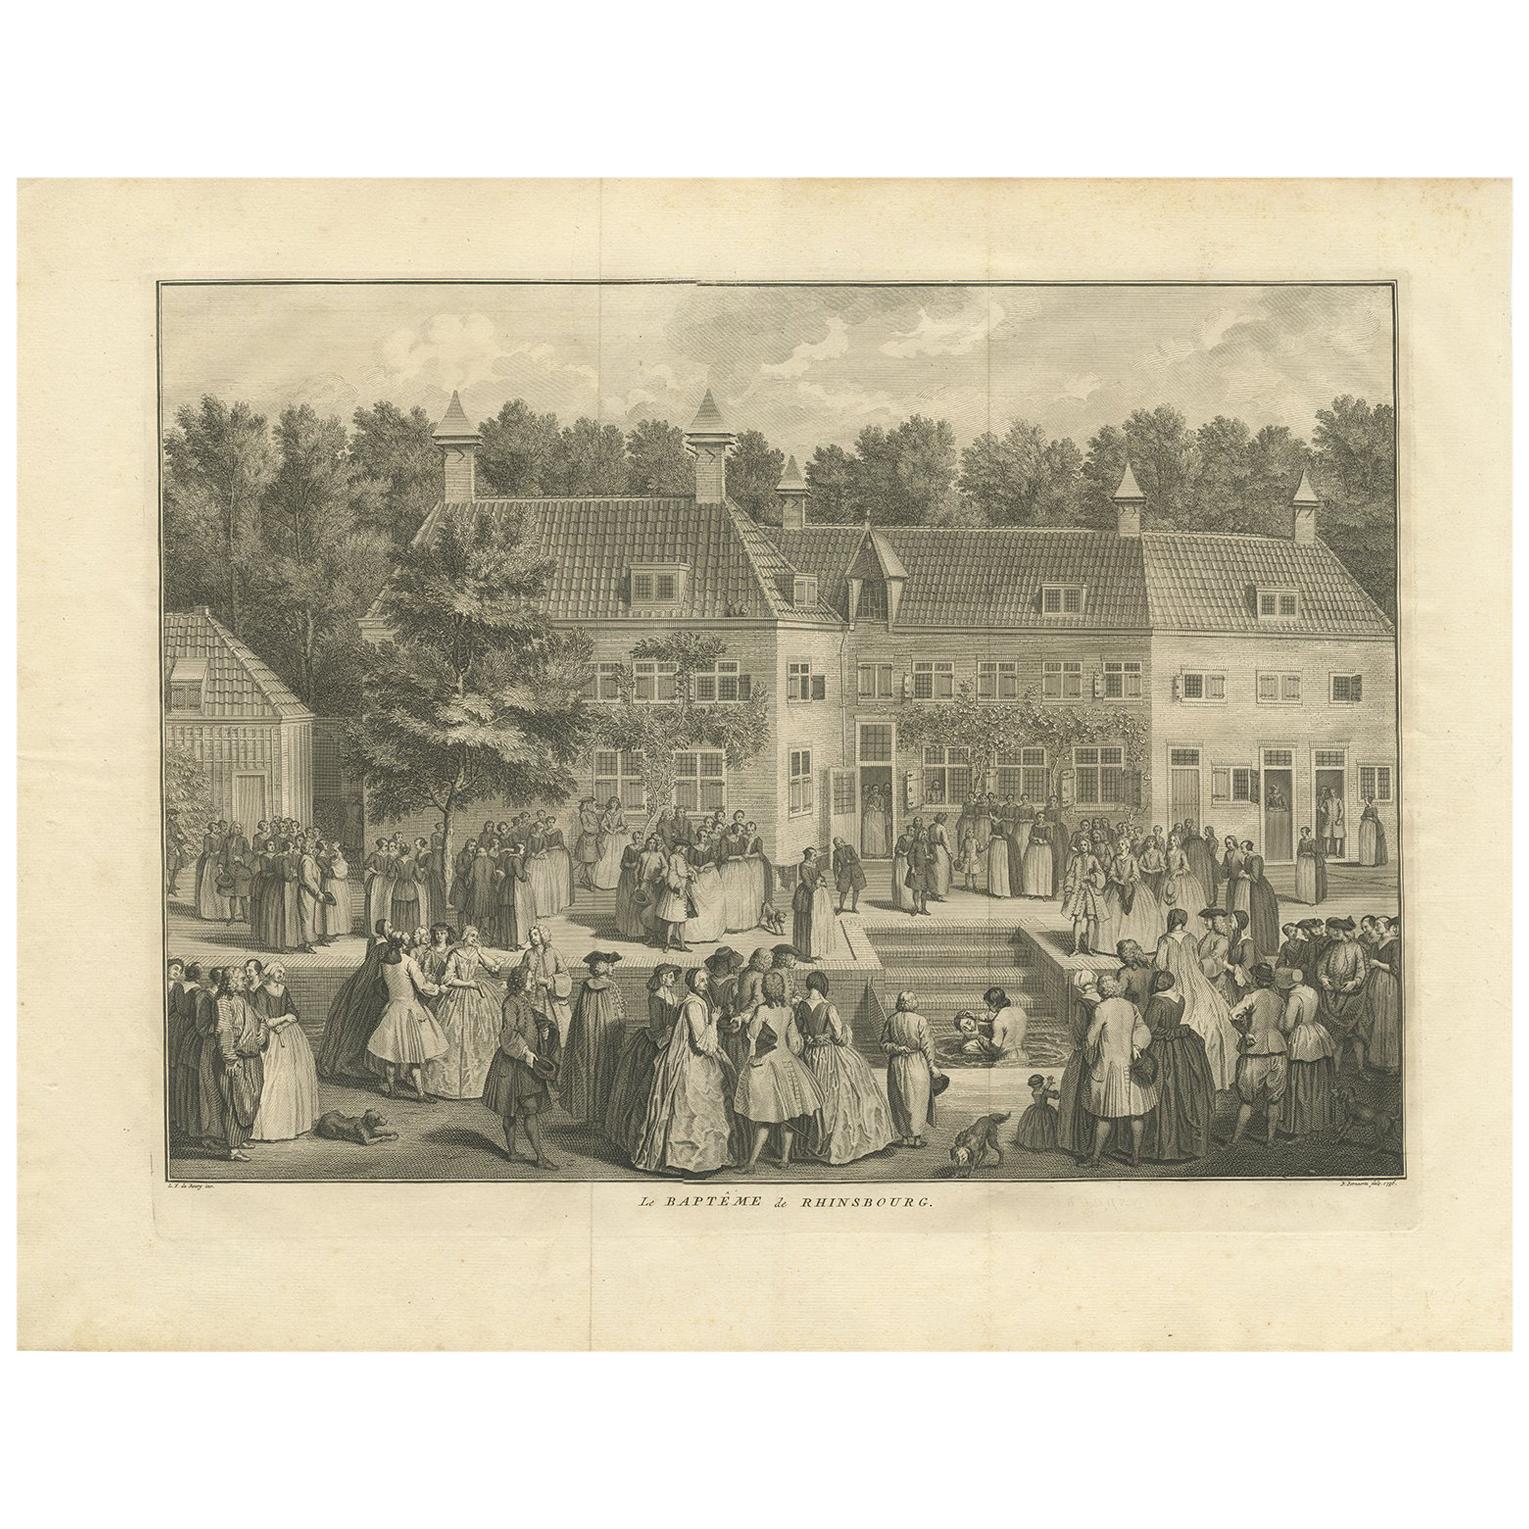 Antique Print of the Baptism of Christians by Bernaerts, 1736